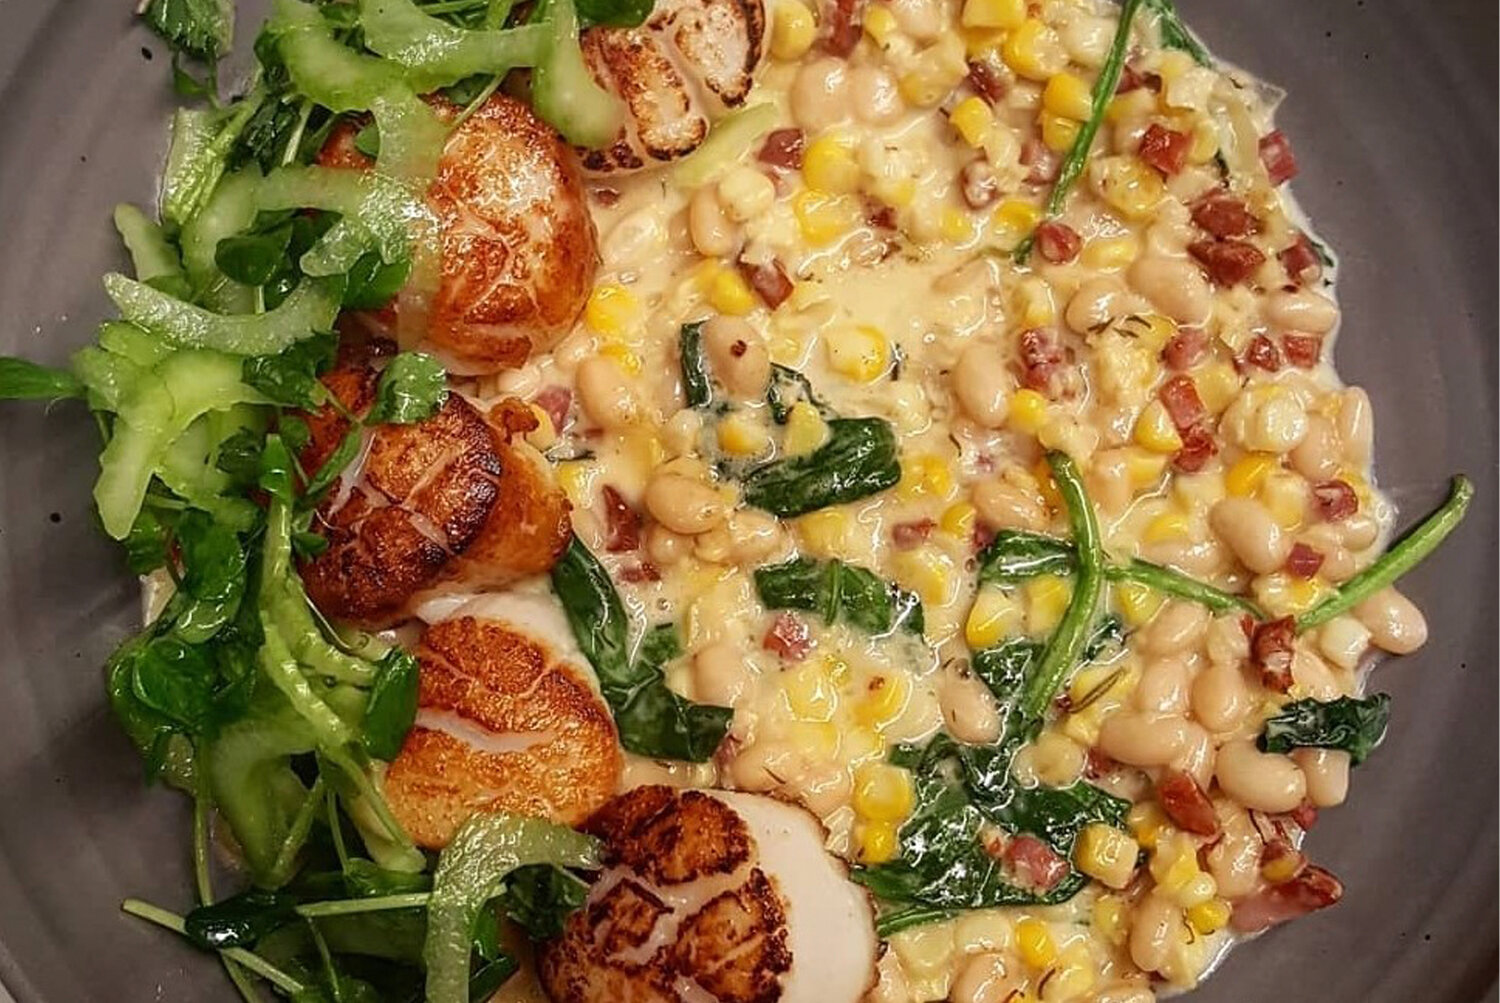 Pan-seared scallops in sweet corn chowder is among summer fare at The Tavern